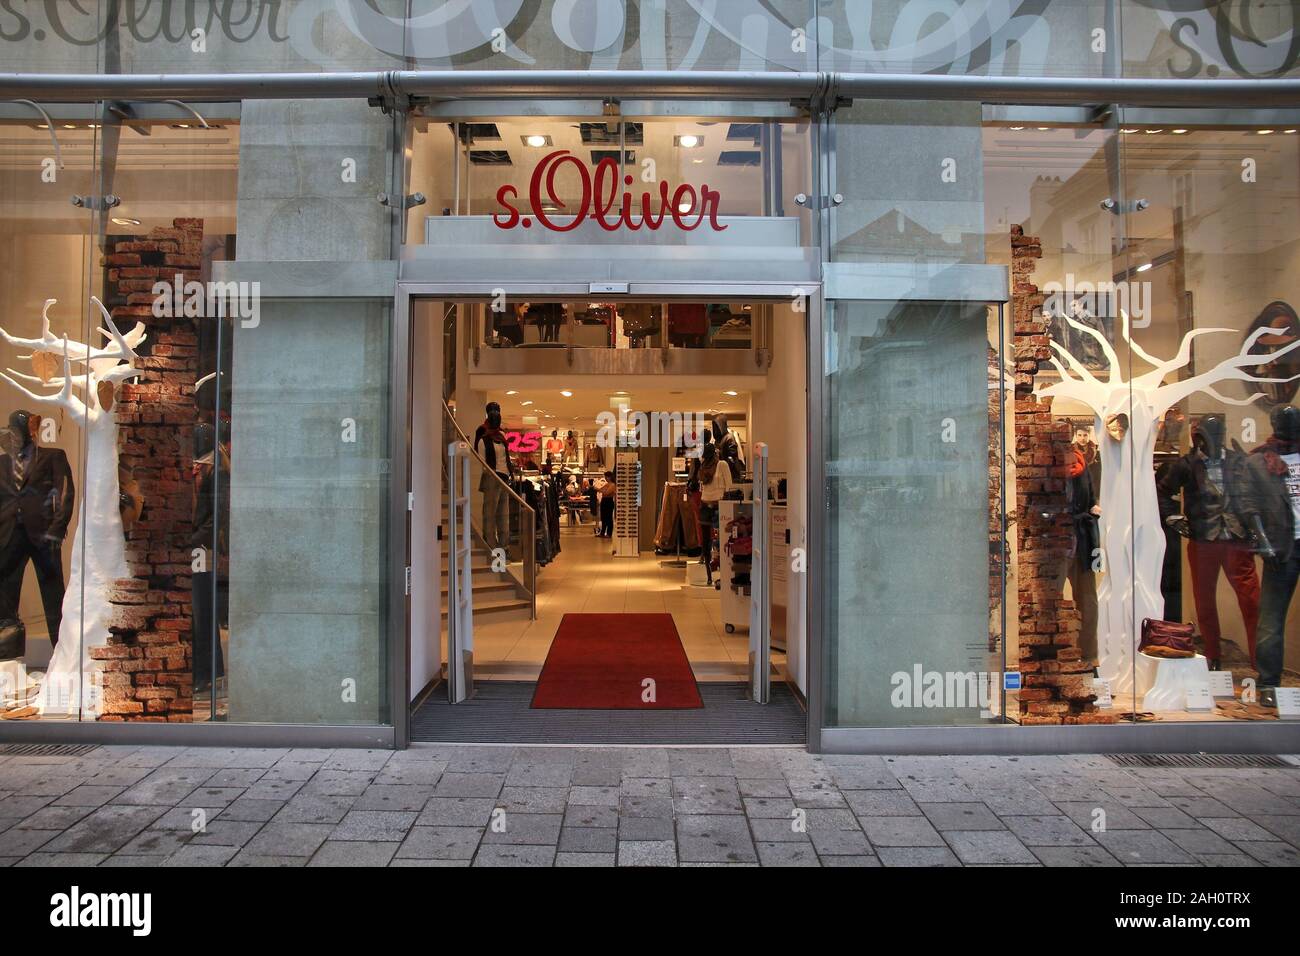 VIENNA - SEPTEMBER 5: S.Oliver fashion store on September 5, 2011 in Vienna. S.Oliver was founded in 1968 and as of 2011 employed about 7,000 people w Stock Photo